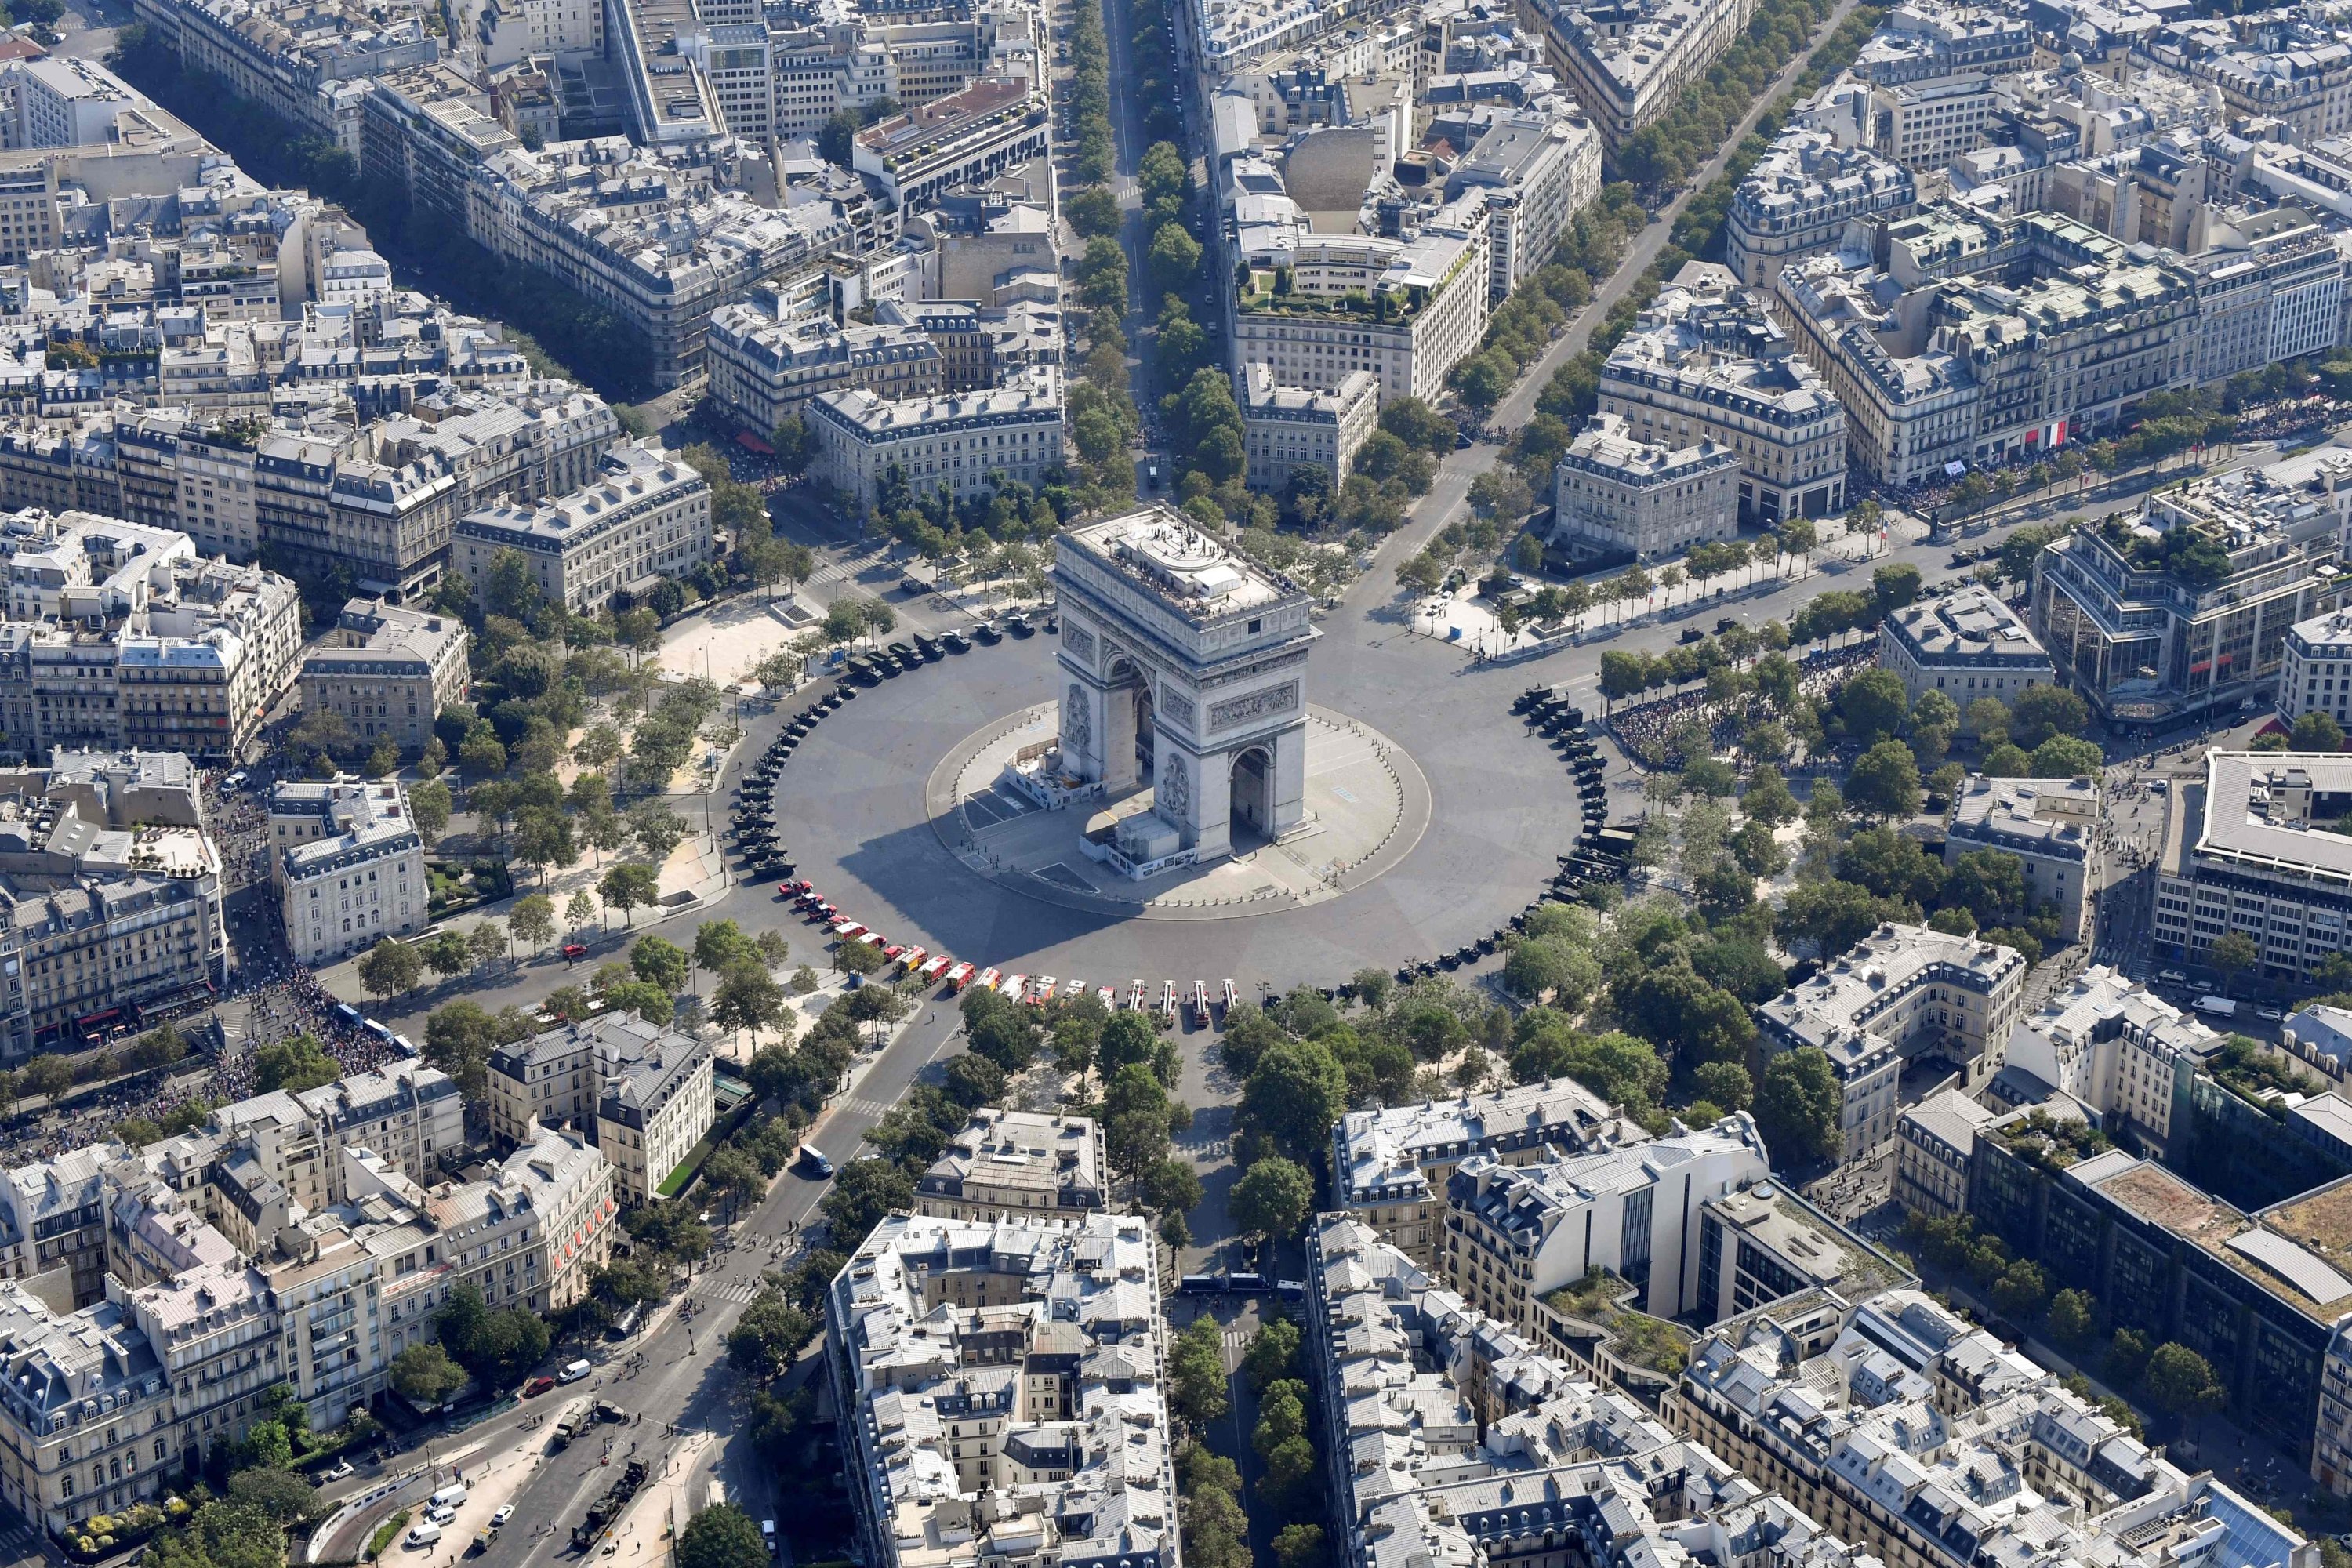 Paris to wrap Arc de Triomphe, as planned by Christo, in July Daily Sabah